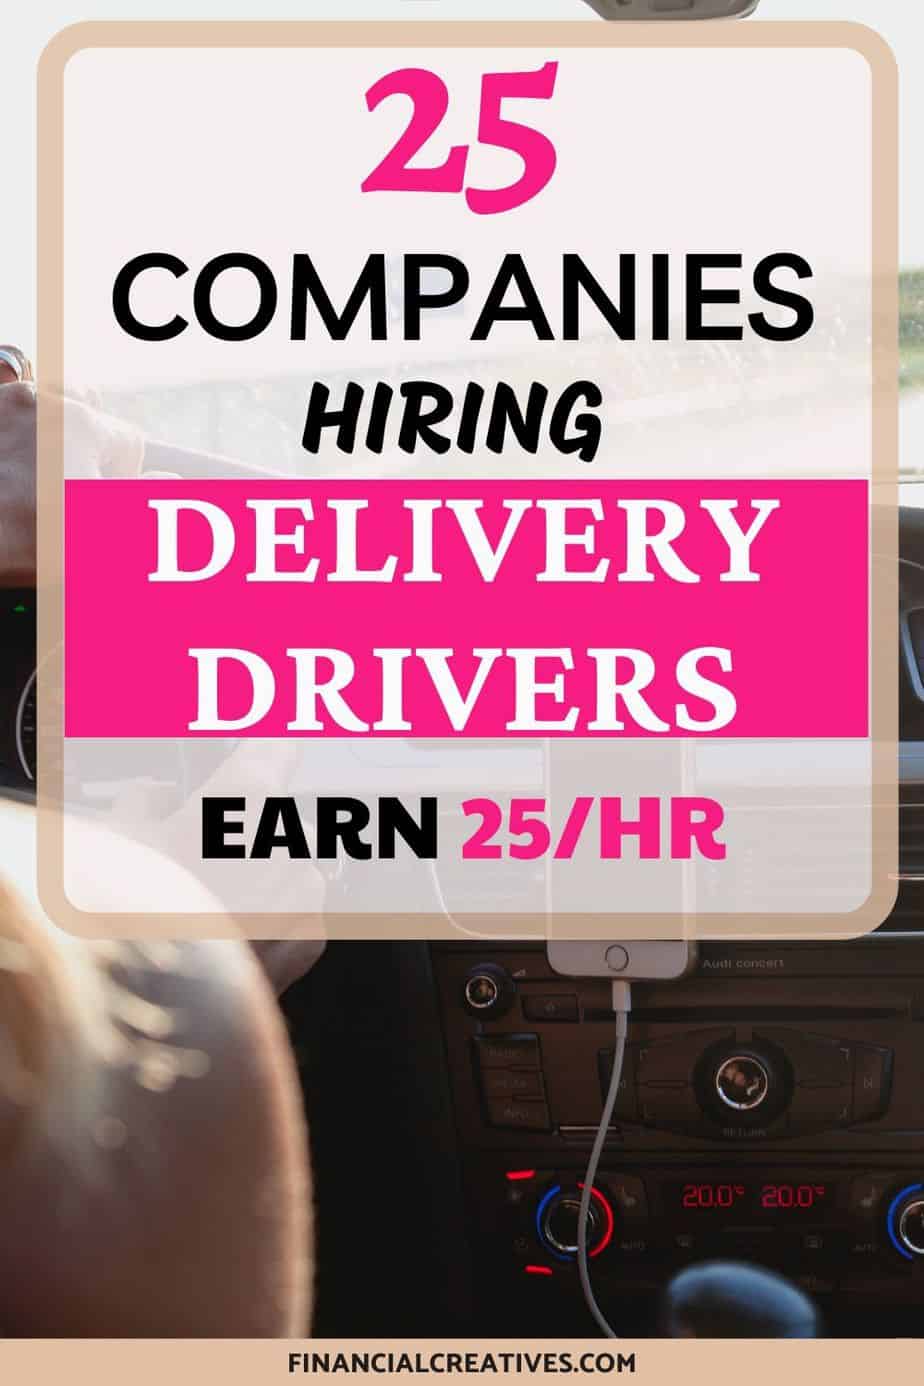 Delivery Driver Jobs near me